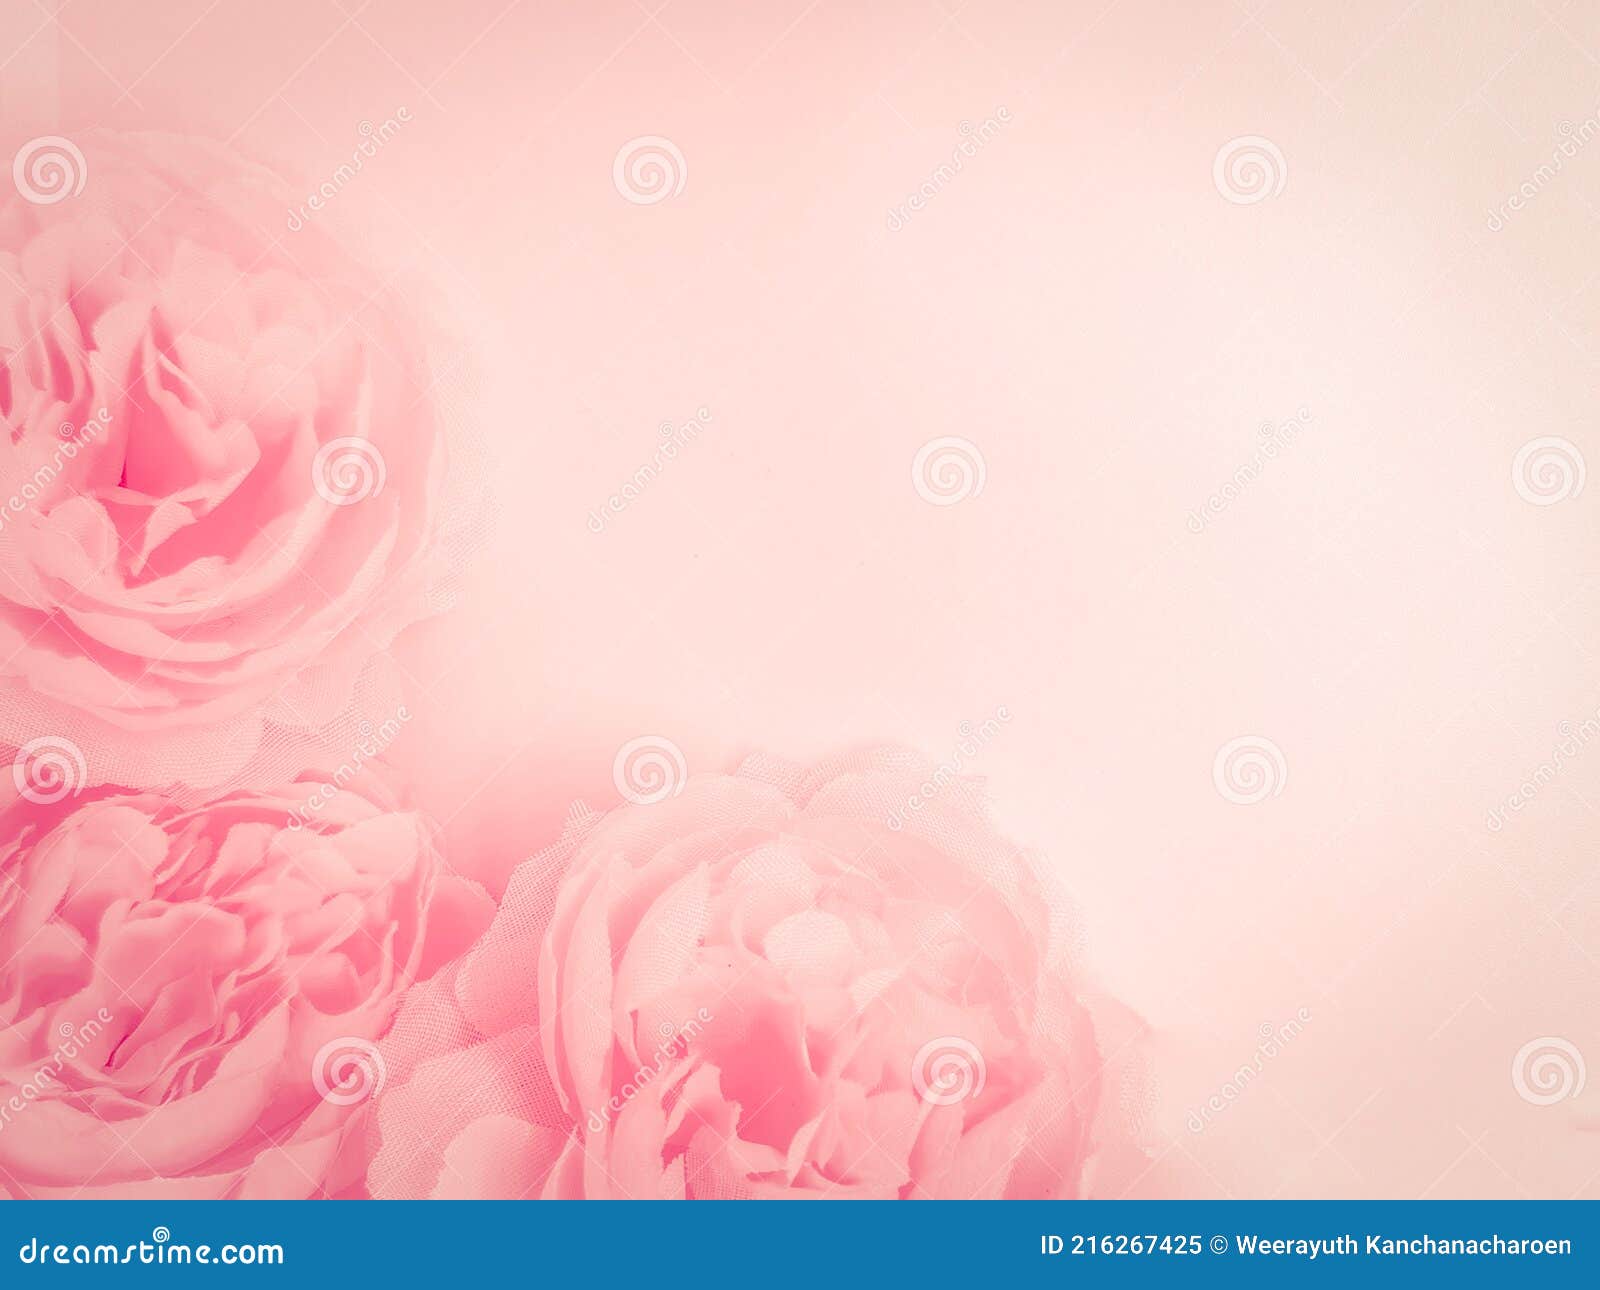 Beautiful Abstract Color Red Flowers on White Background, Light Pink Flower  Frame, Pink Leaves Texture, Gray Background, Valentine Stock Image - Image  of abstract, heart: 216267425